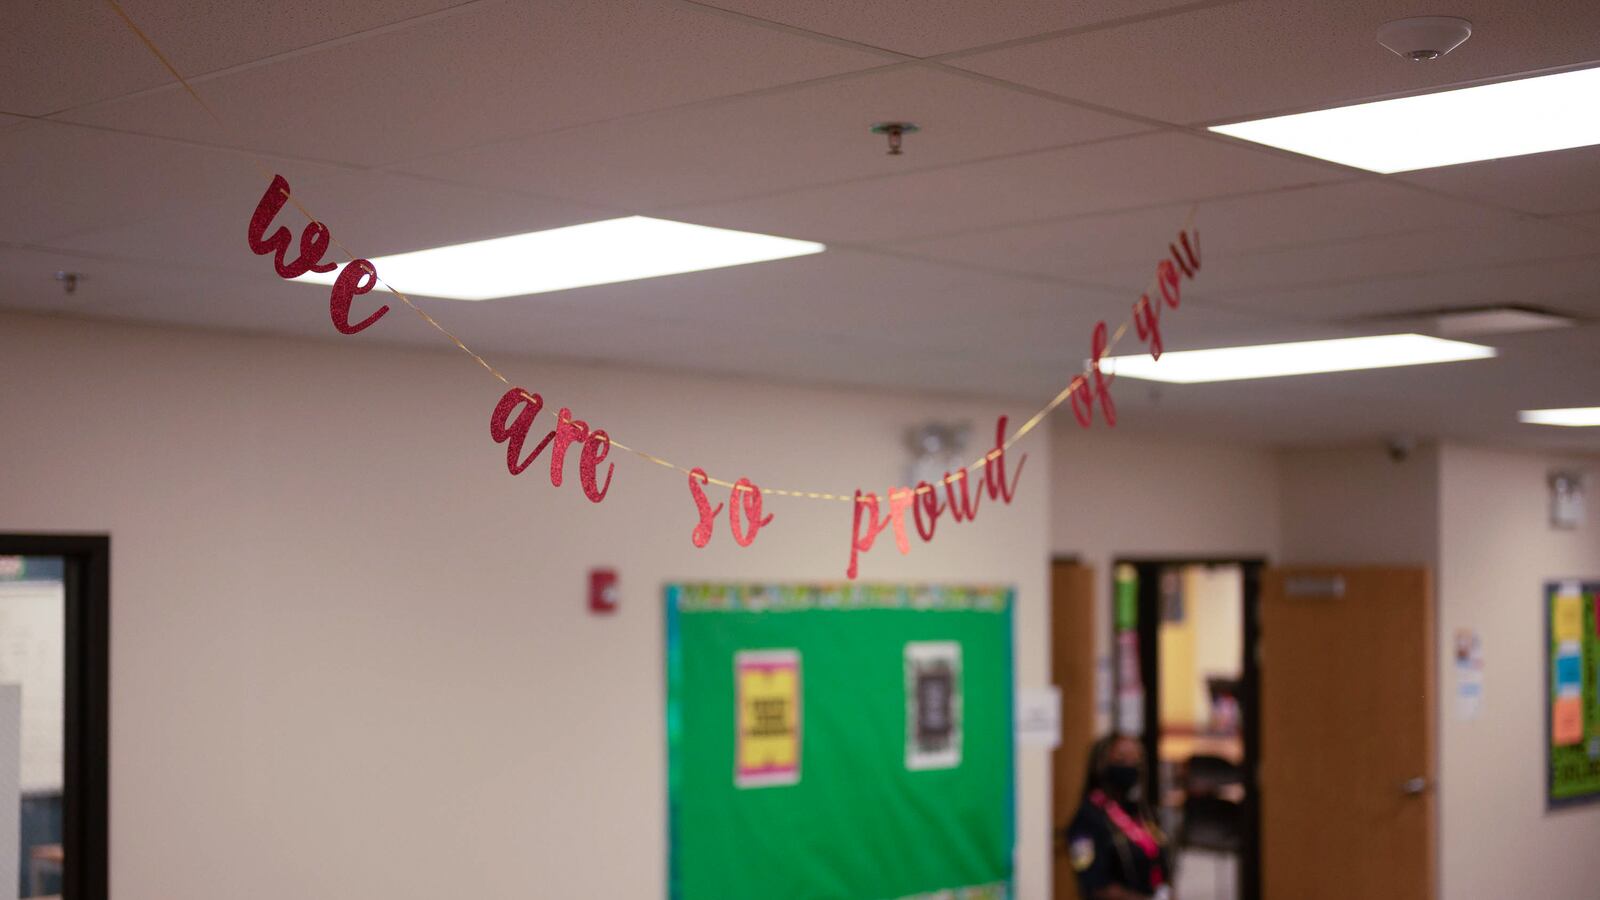 A small string banner that reads “we are so proud of you” hangs in the hallway of a school.